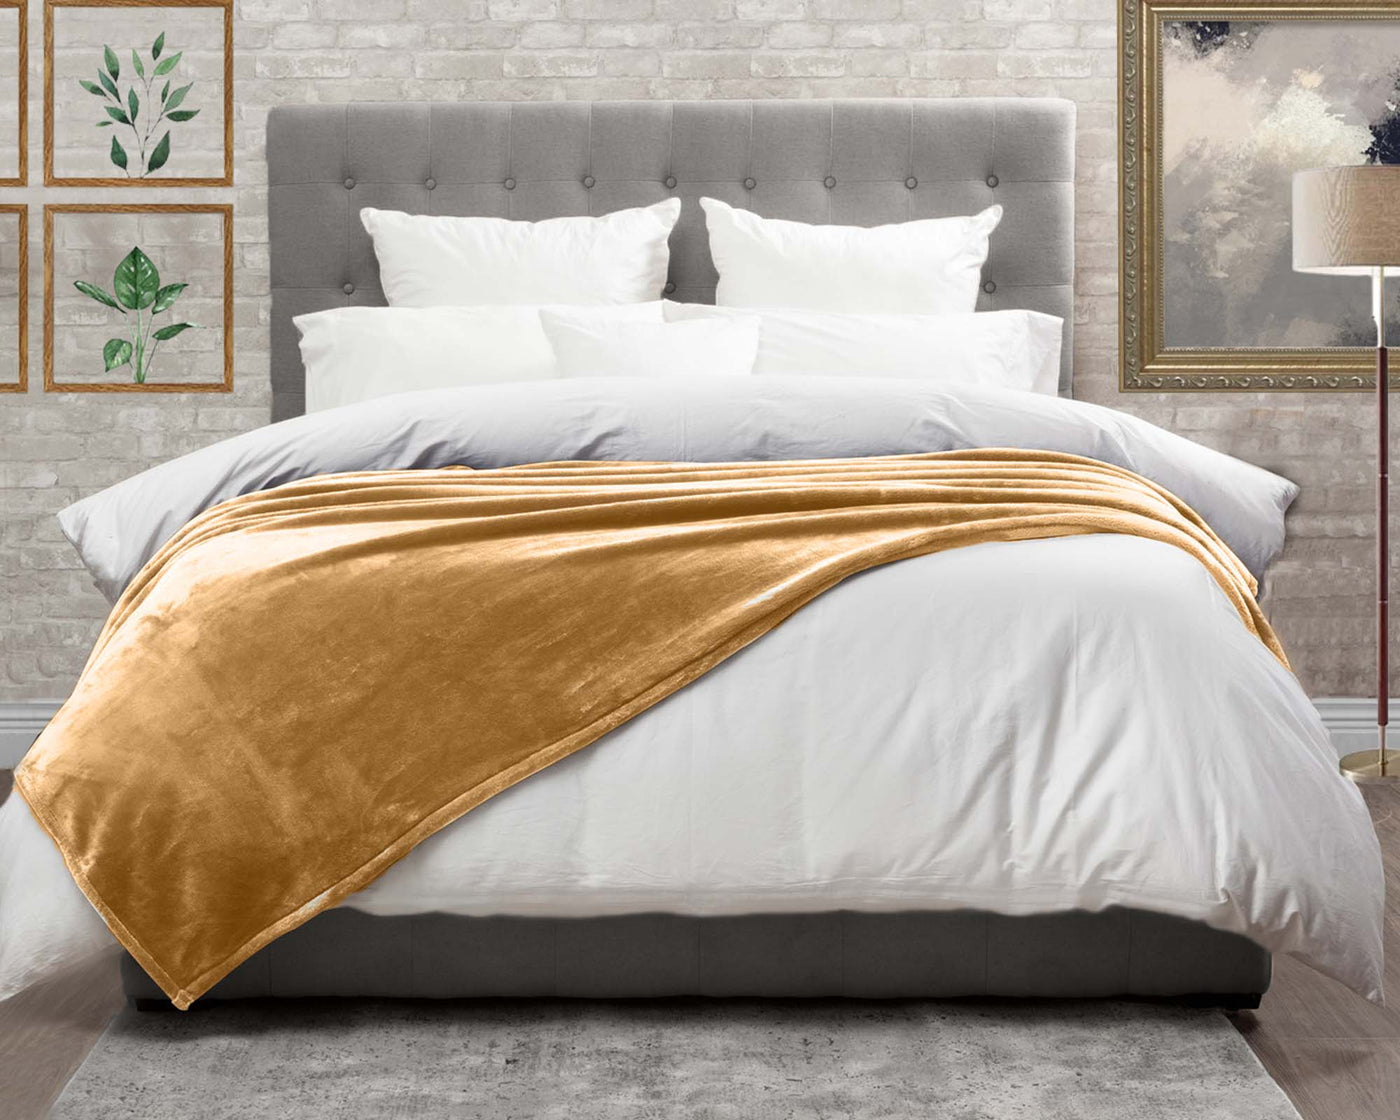 Tan Cashmere fleece blanket on the bed #colour_tan